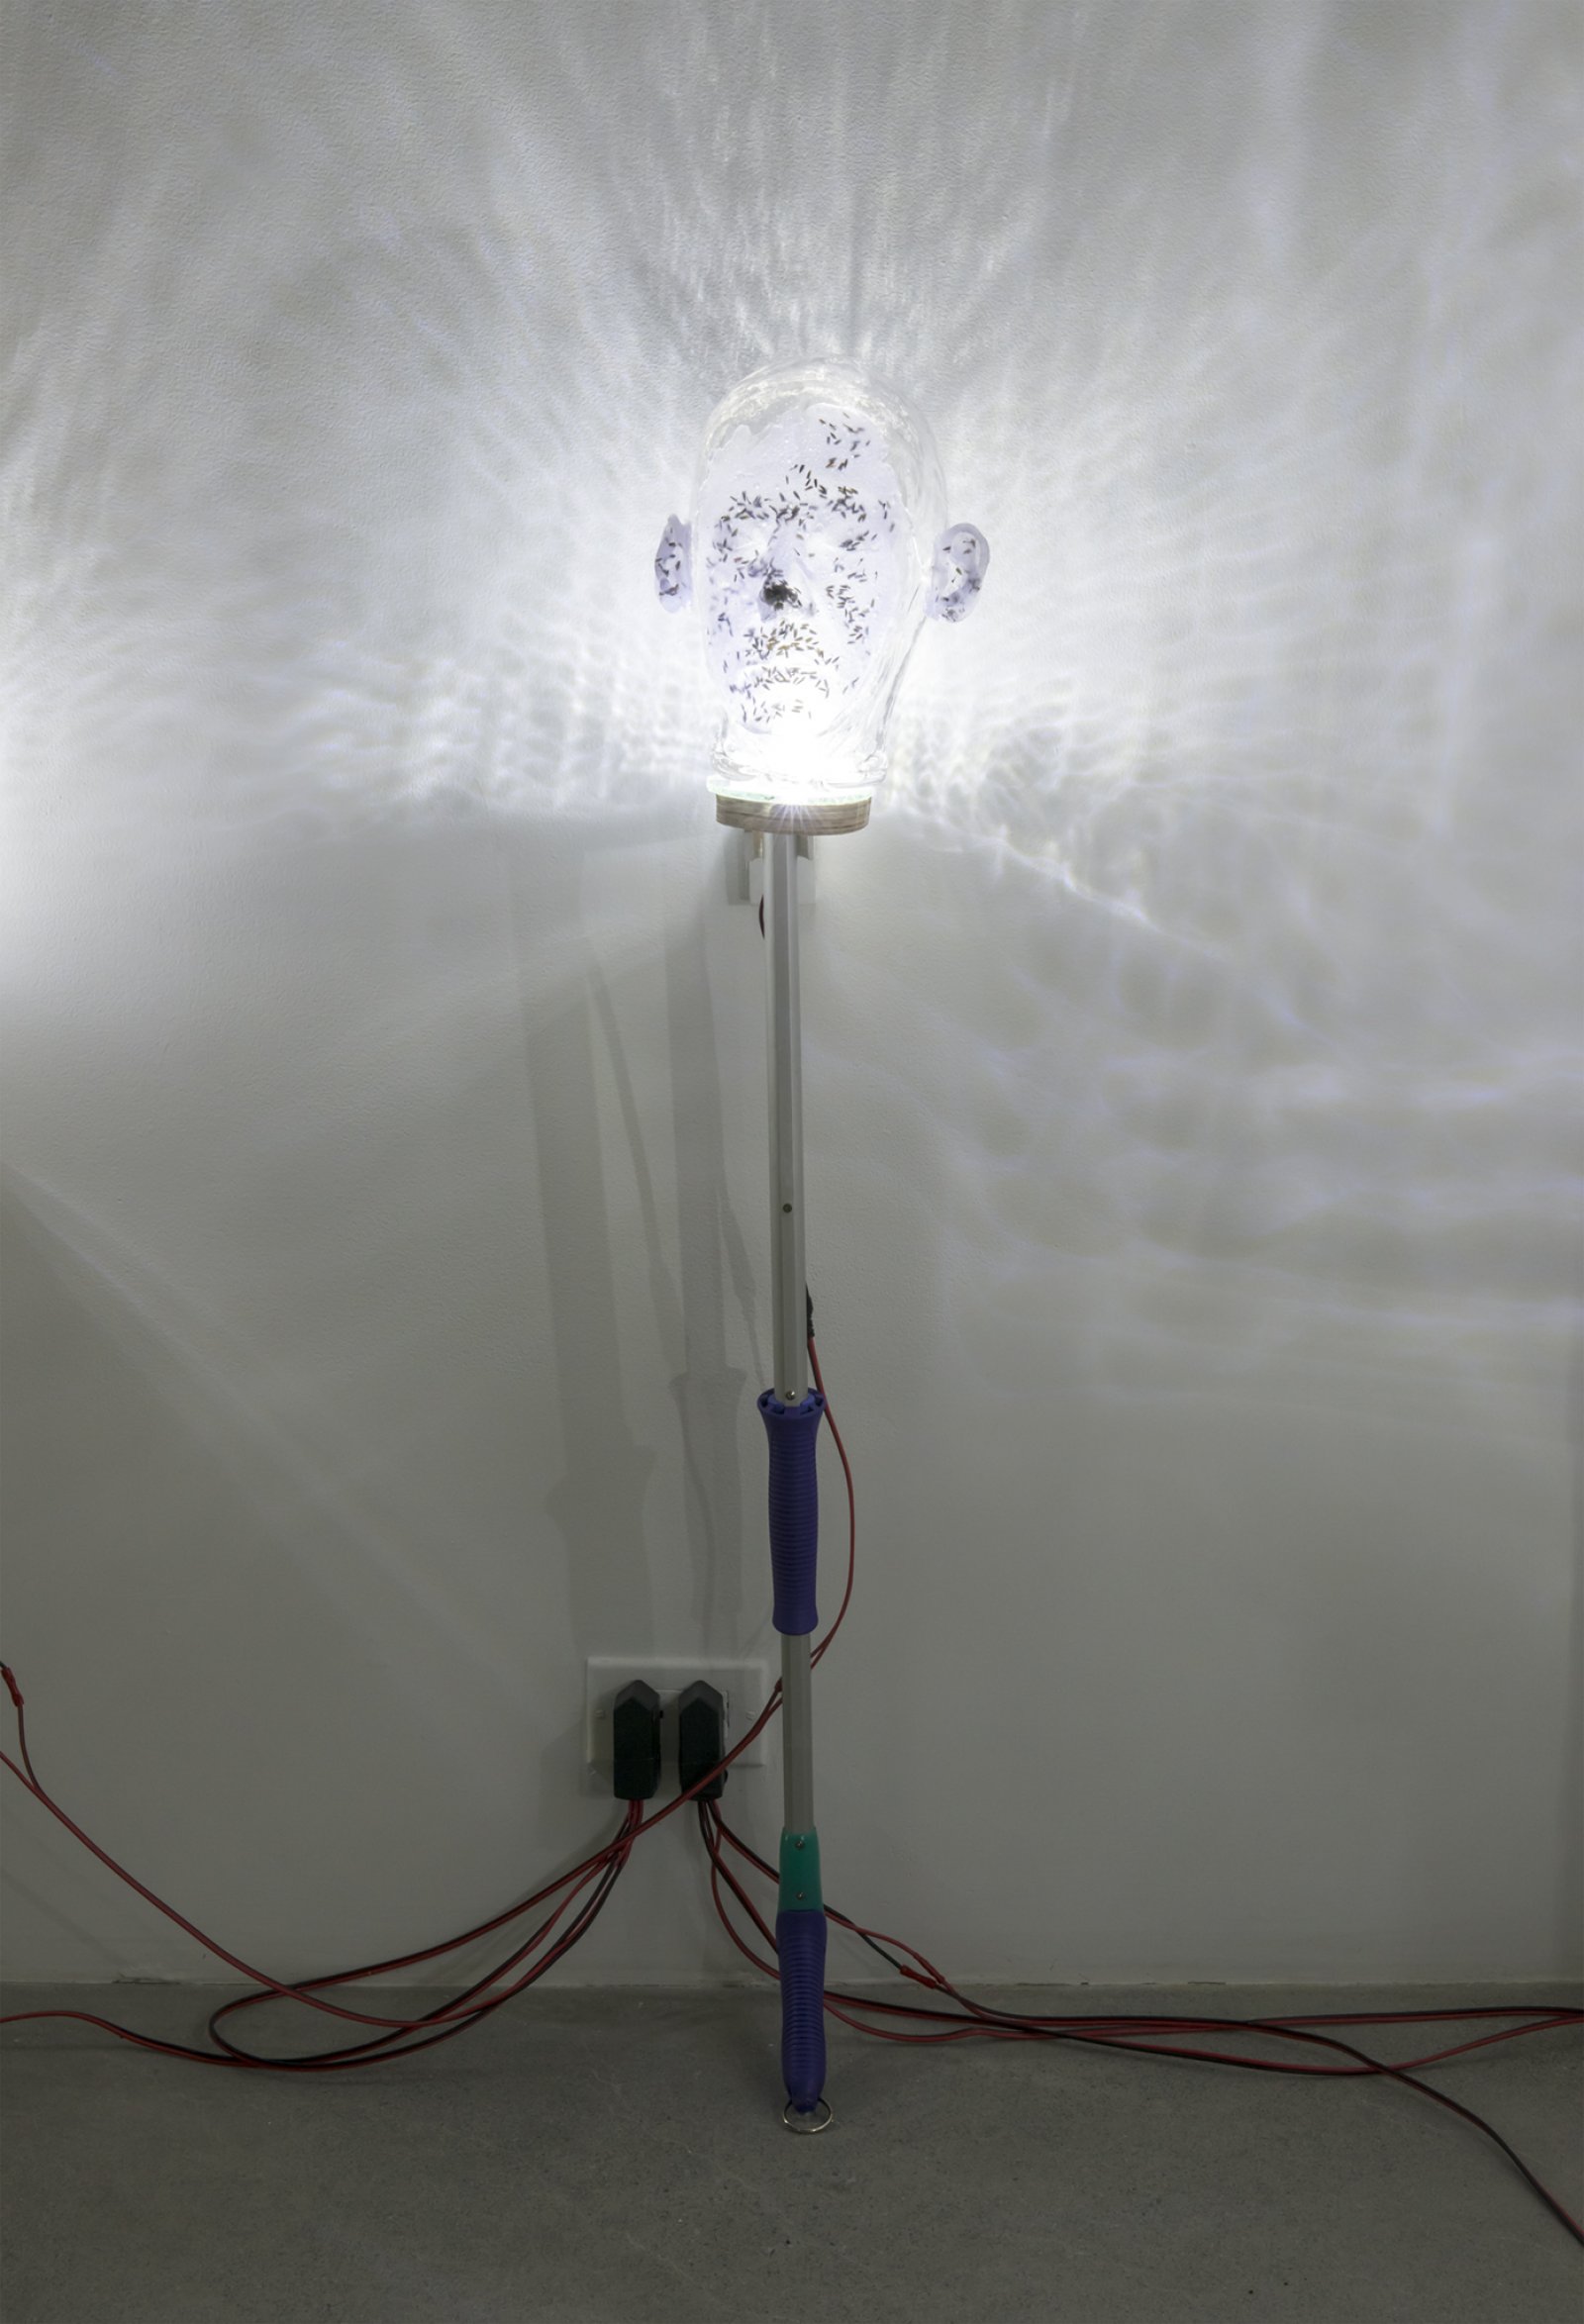 ​​Julia Feyrer, Witnesses, 2018, lavender, swiffer handle, handblown glass, dyed silicone, LED lights, 40 x 7 x 10 in. (102 x 18 x 25 cm)​ by Julia Feyrer